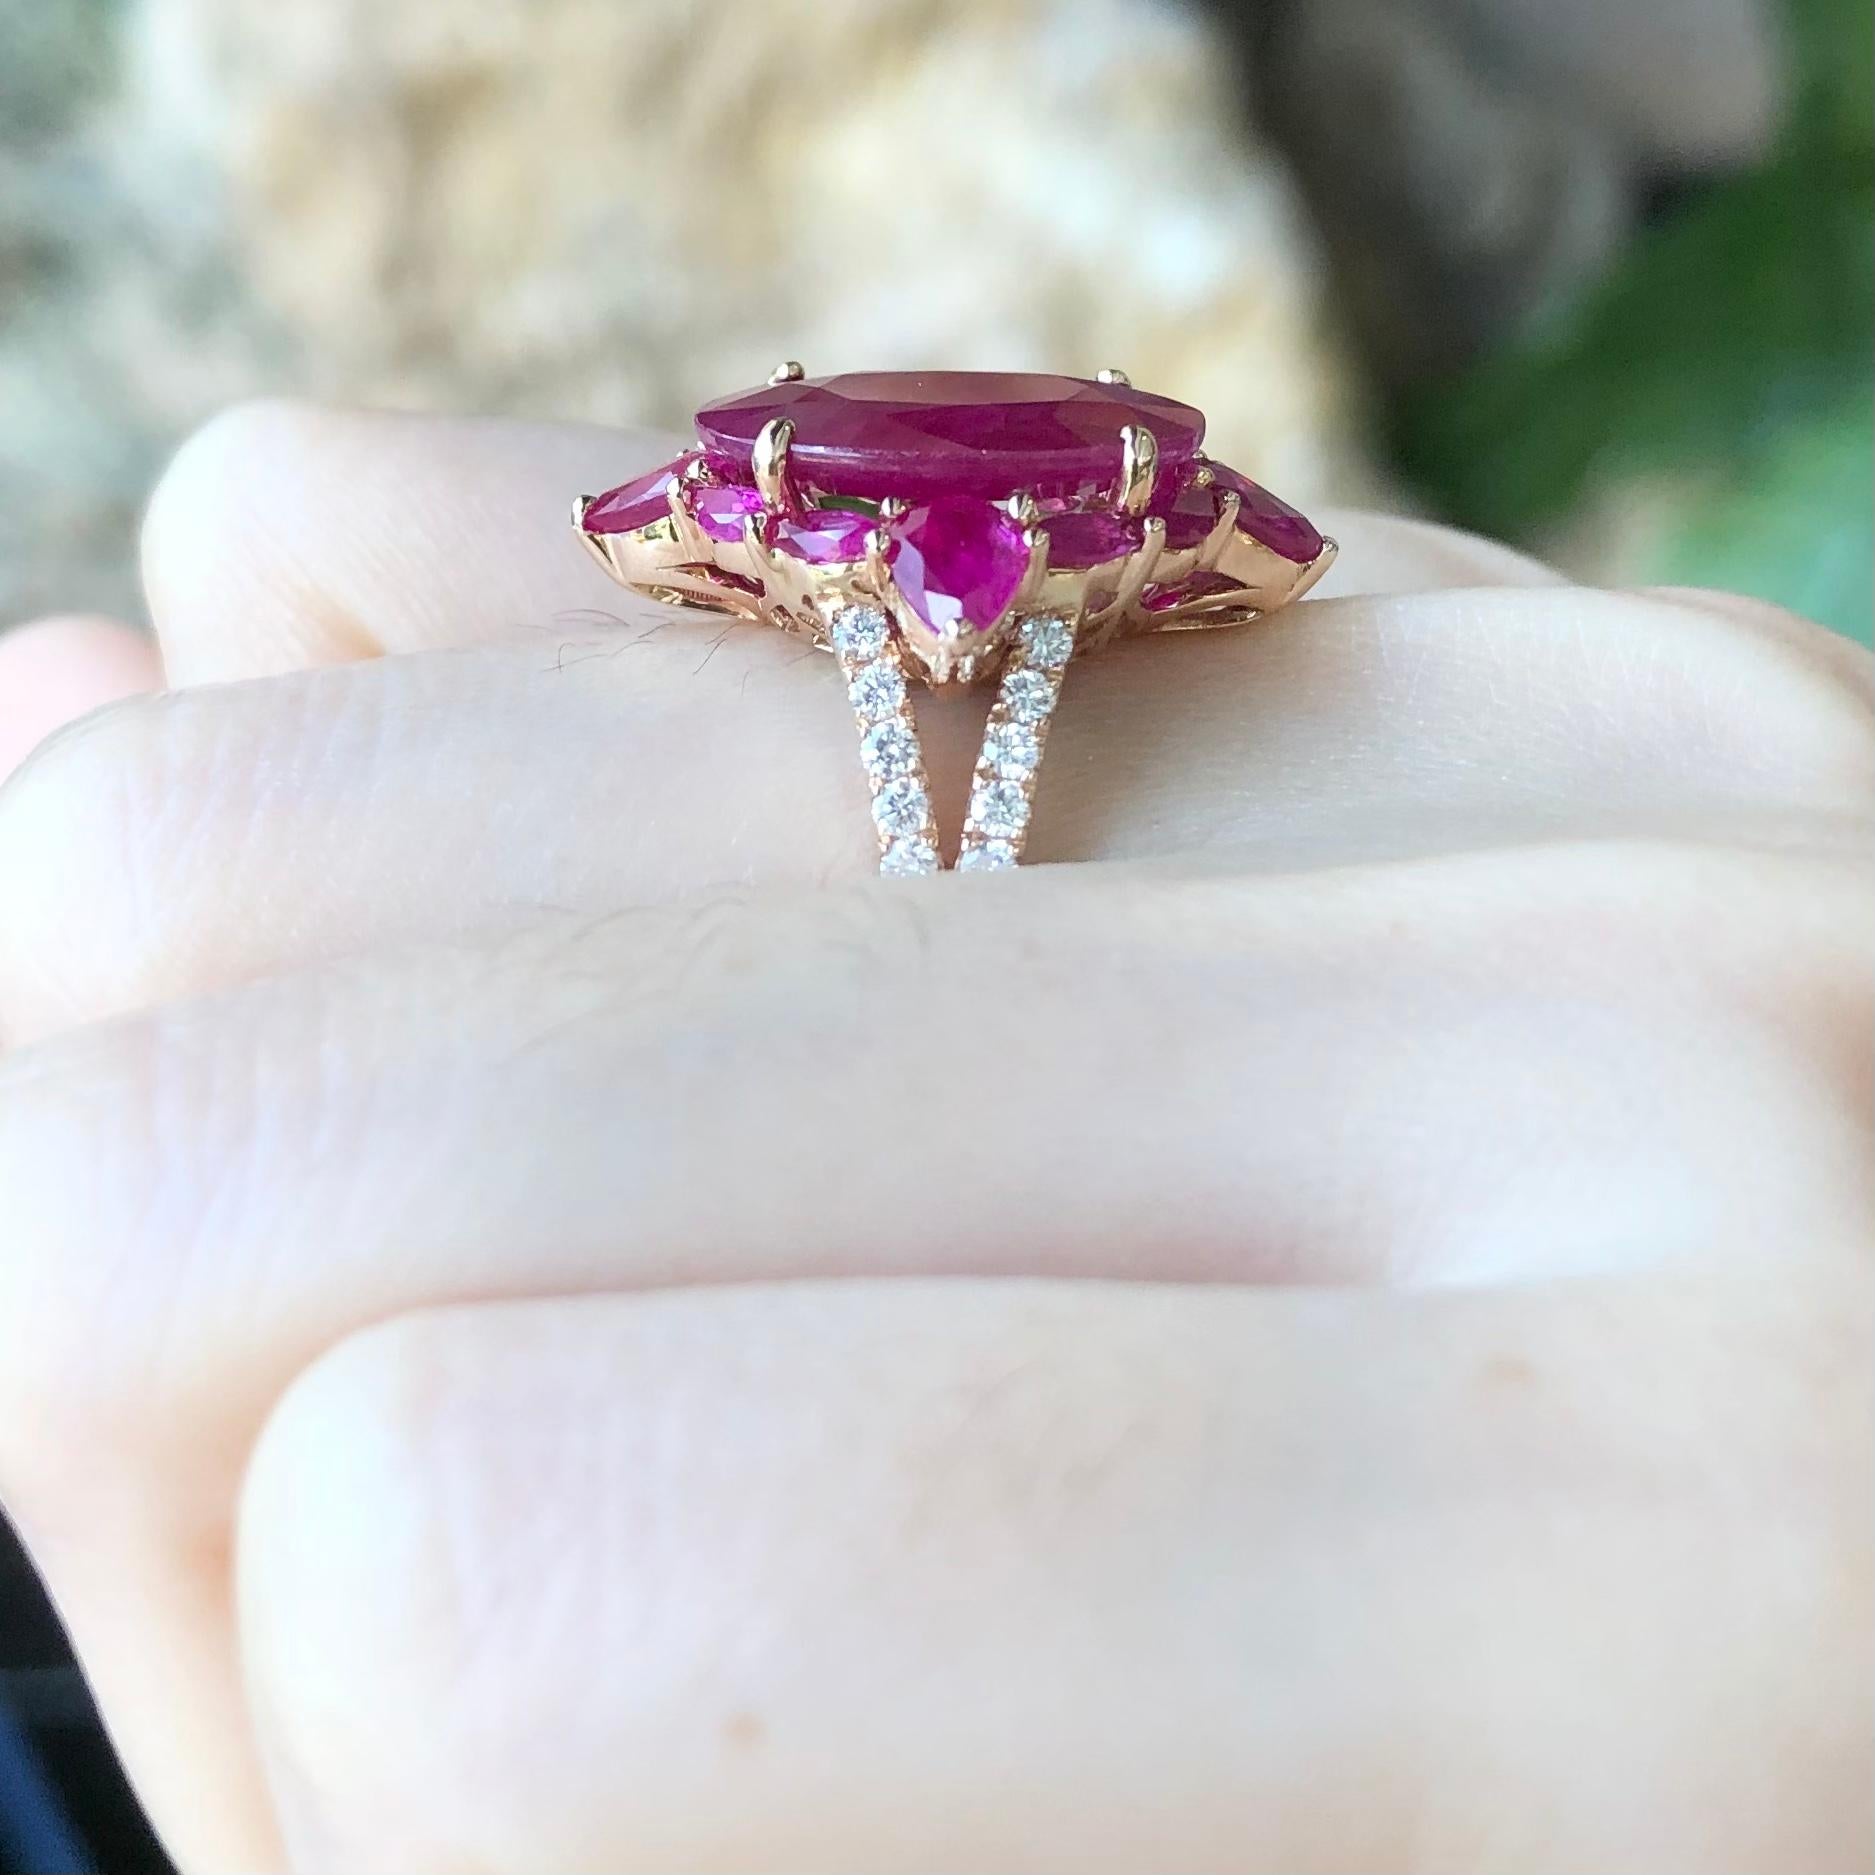 Ruby 6.91 carats, Ruby 3.83 carats and Diamond 0.38 carat Ring set in 18 Karat Rose Gold Settings

Width:  2.3 cm 
Length: 2.4 cm
Ring Size: 53
Total Weight: 8.48 grams



